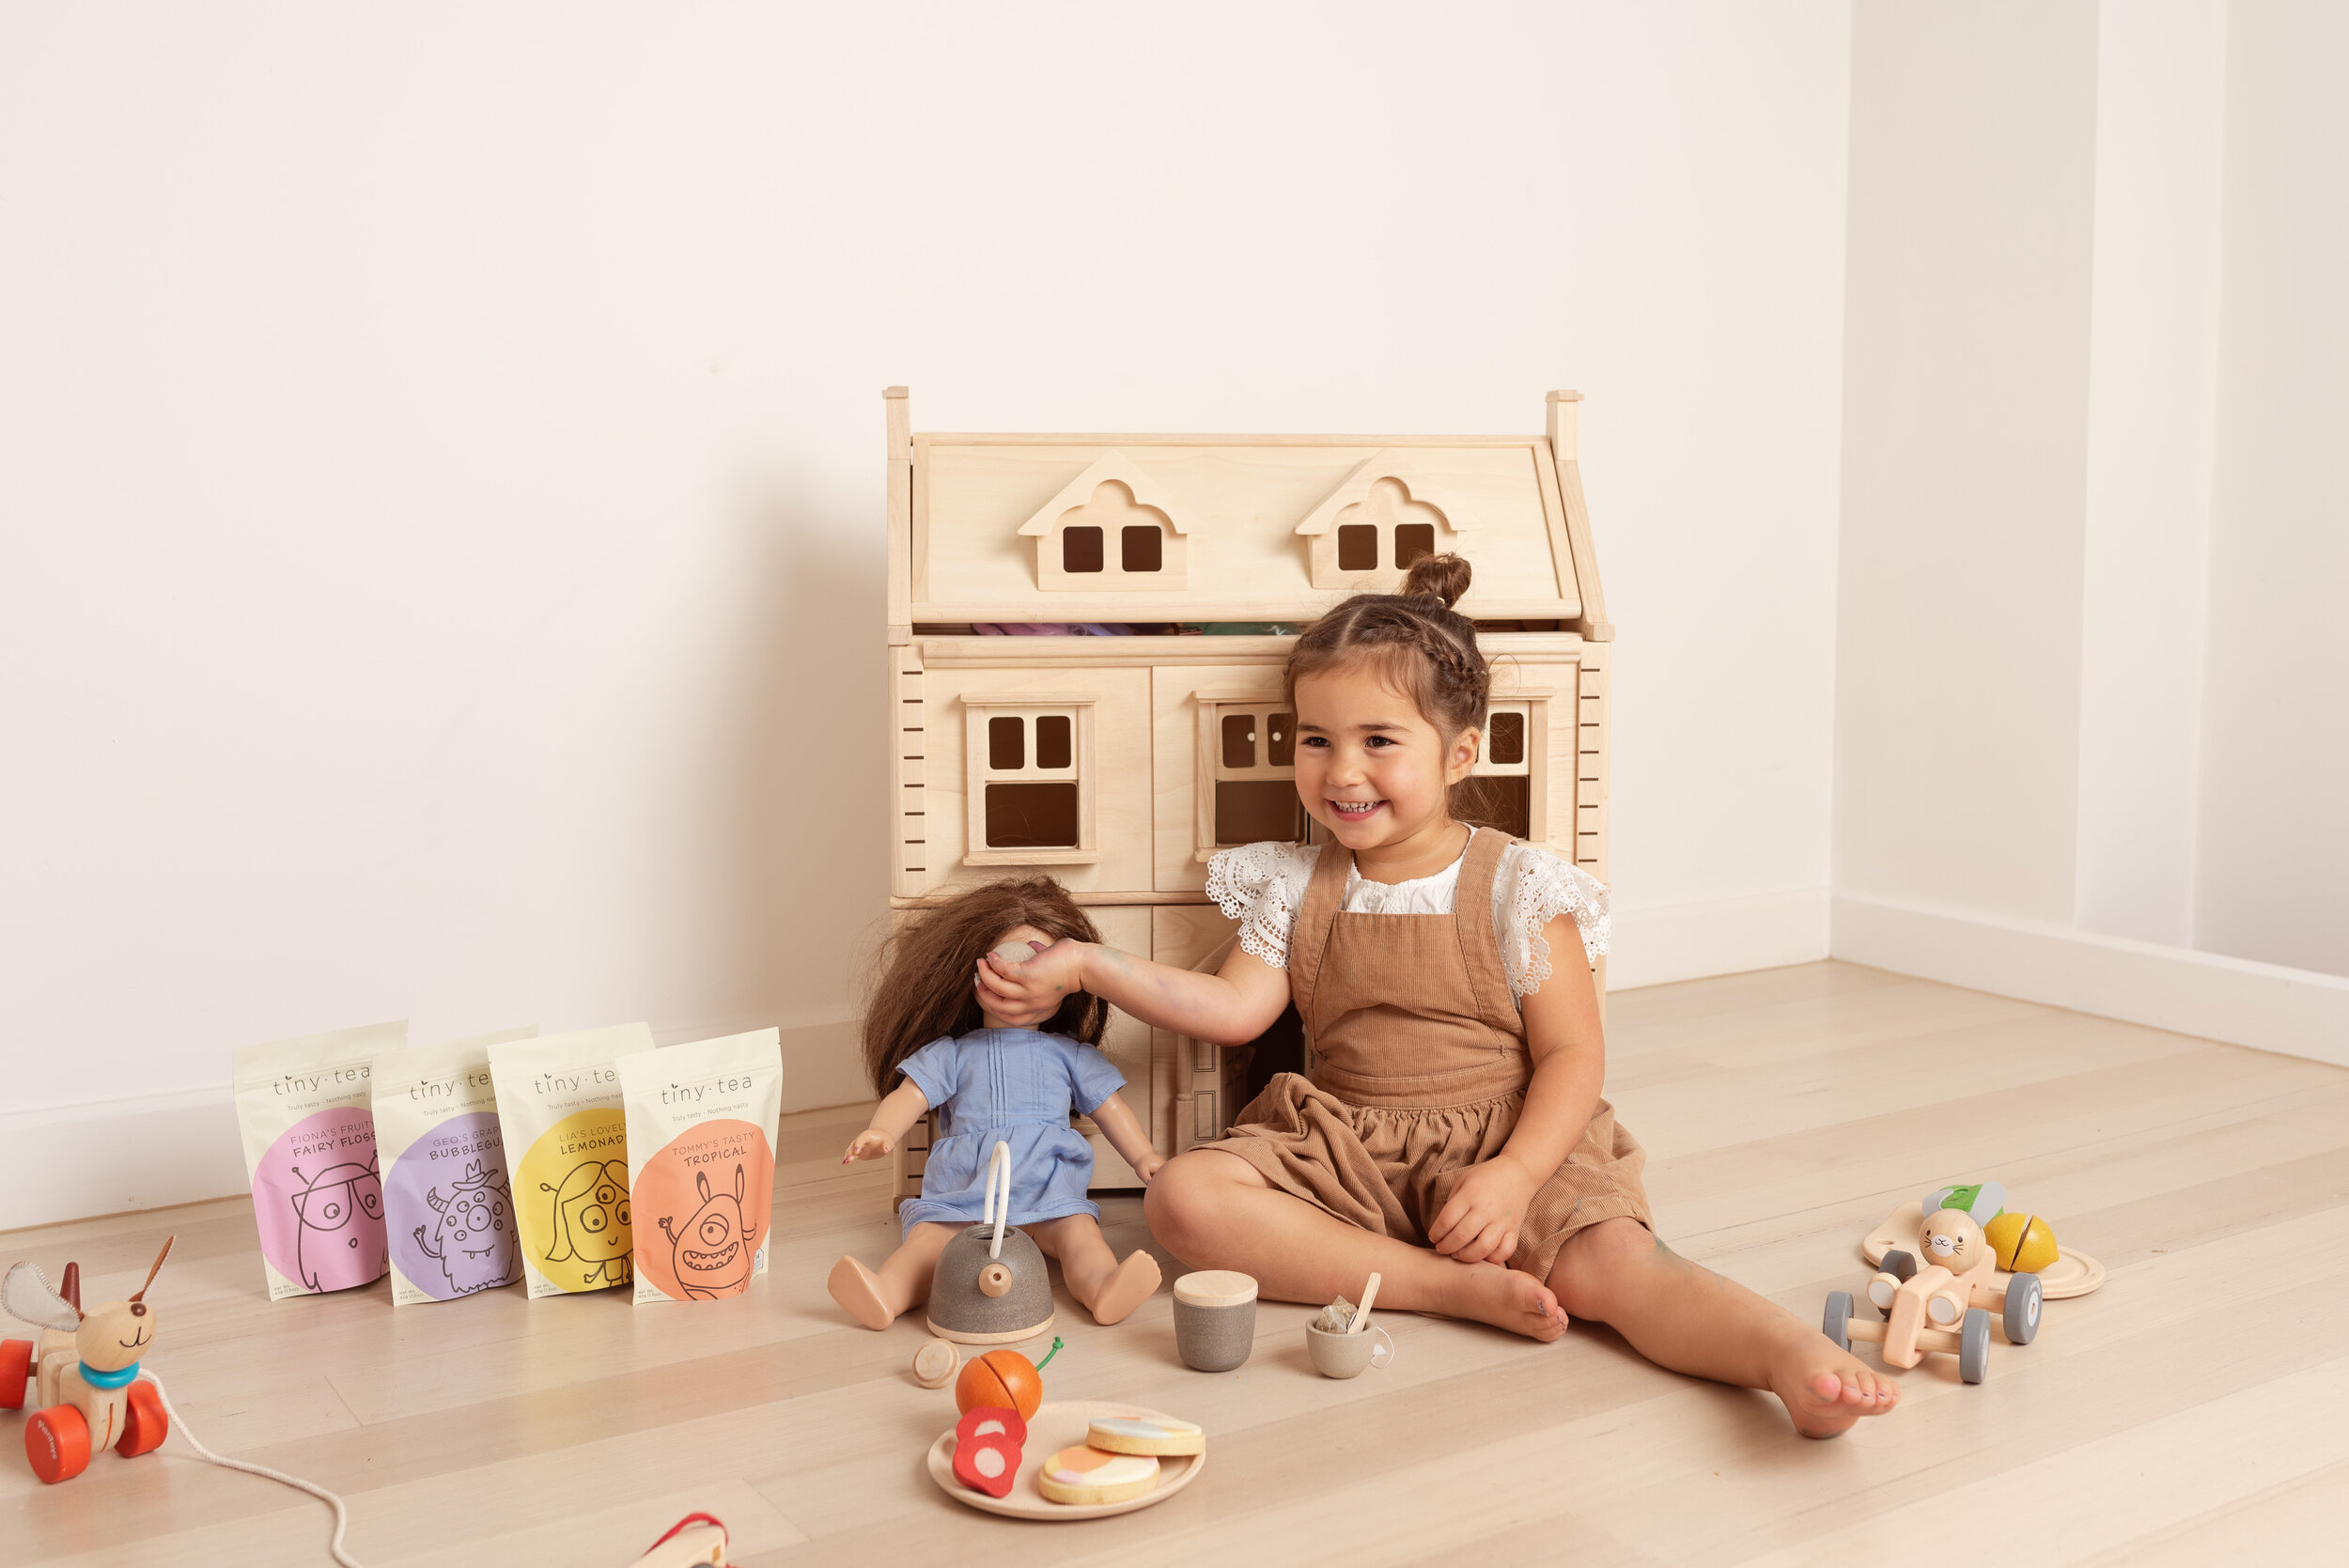 Plan Toys are a sustainable toy manufacturer, so another stand out and much-loved choice by both the adults and the kids